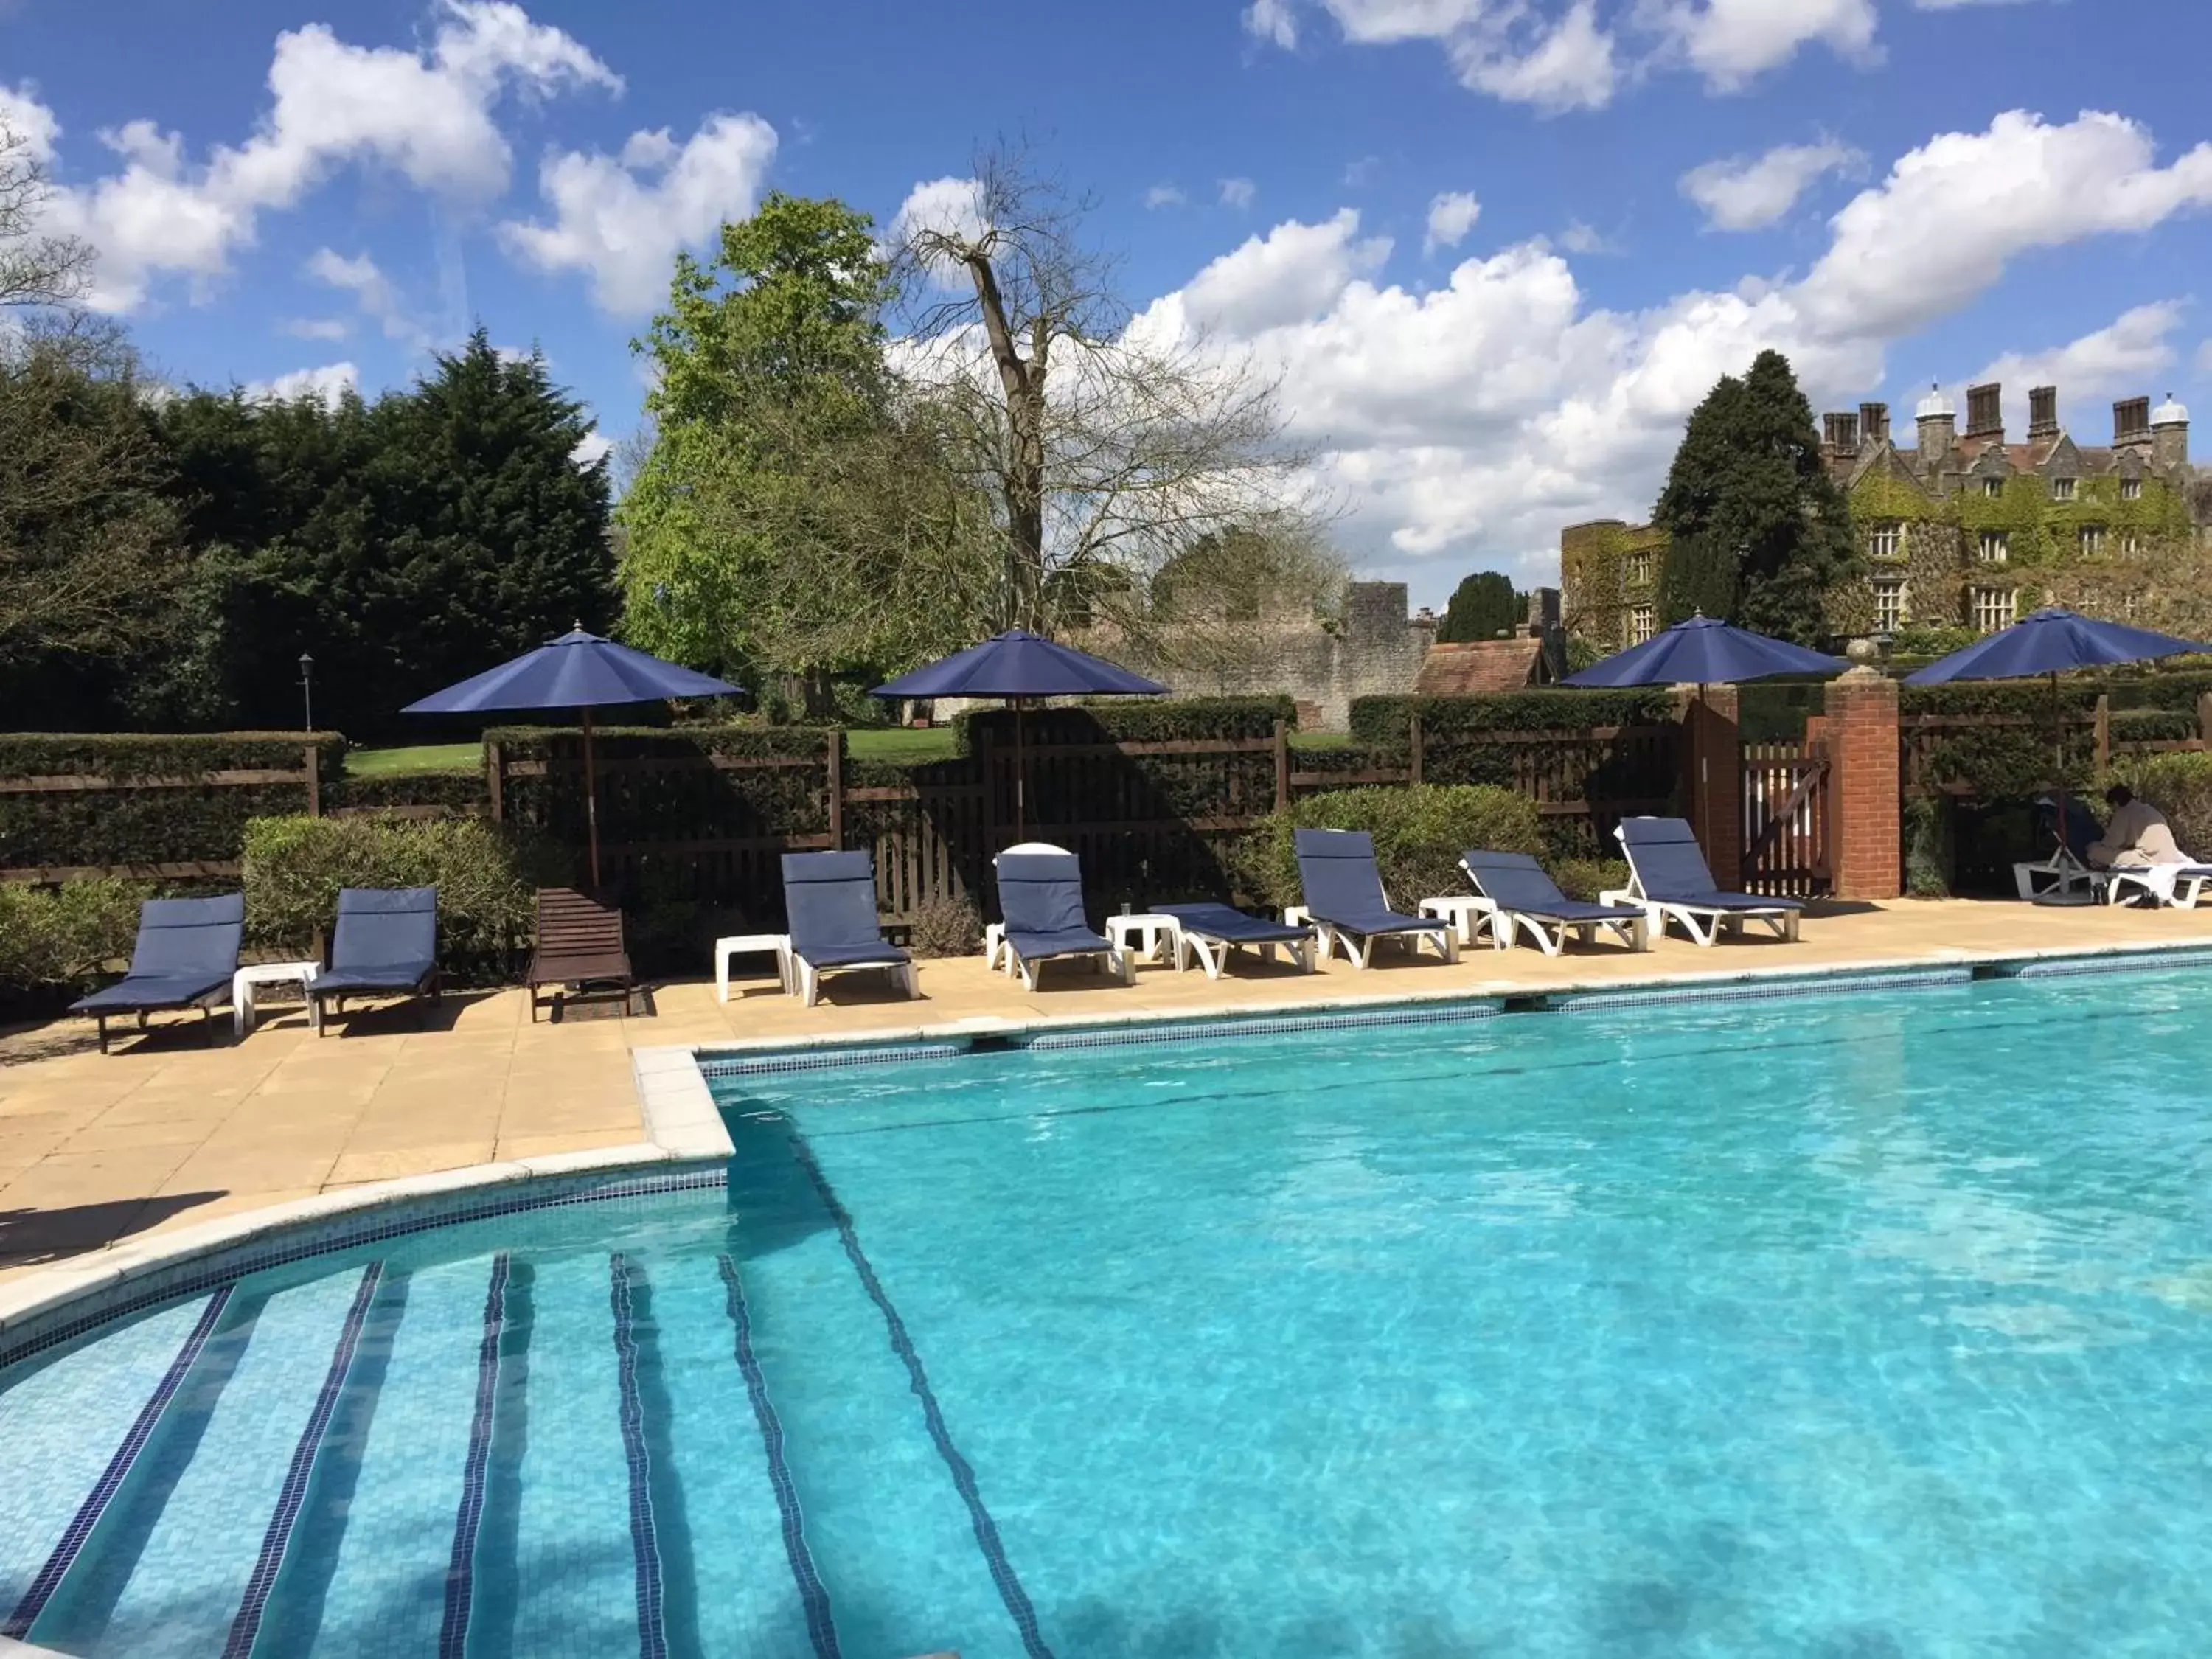 Swimming pool in Eastwell Manor, Champneys Hotel & Spa